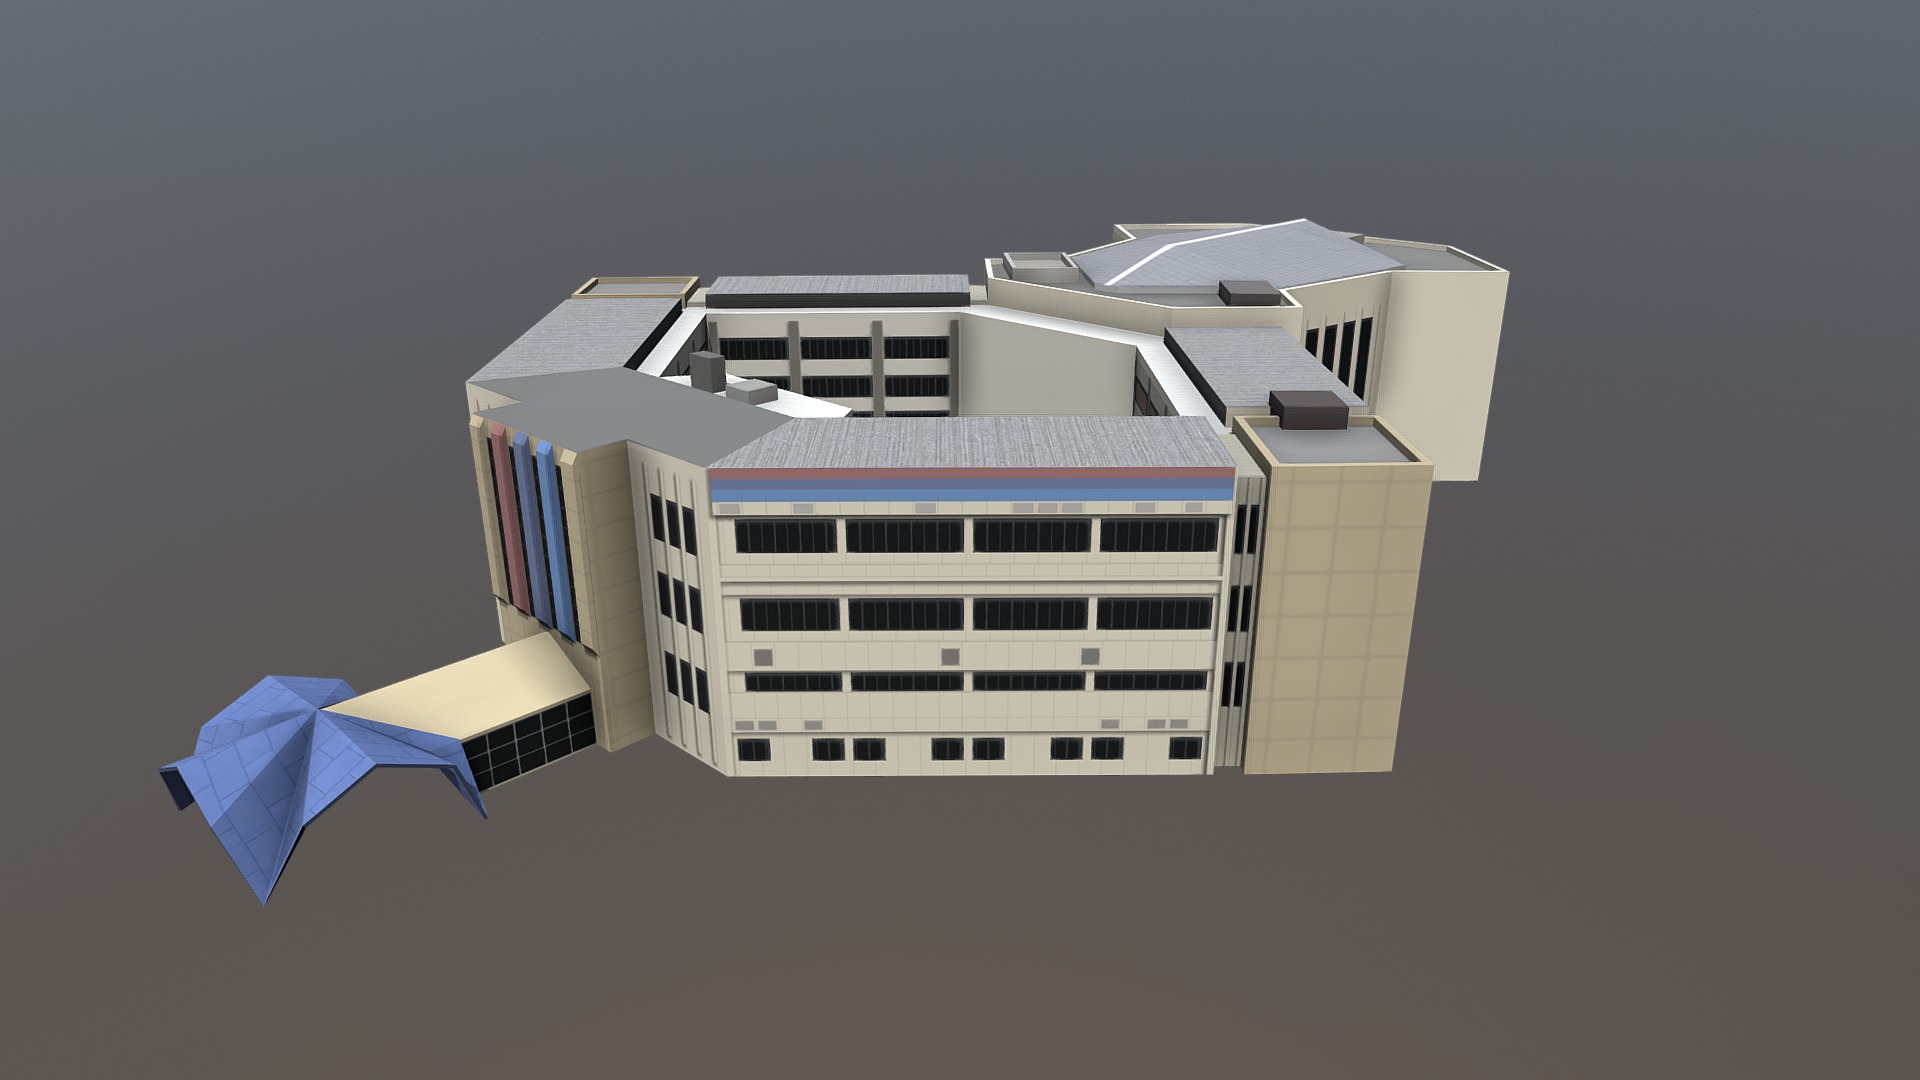 You can buy this 3D model here - -link removed-  Low-Poly 3D Model of the National Defence College which is the apex military training institution for the Nigerian Armed Forces, and a Centre of Excellence for peace support operations training at the strategic level in West Africa. Located in the Abuja city 3d model